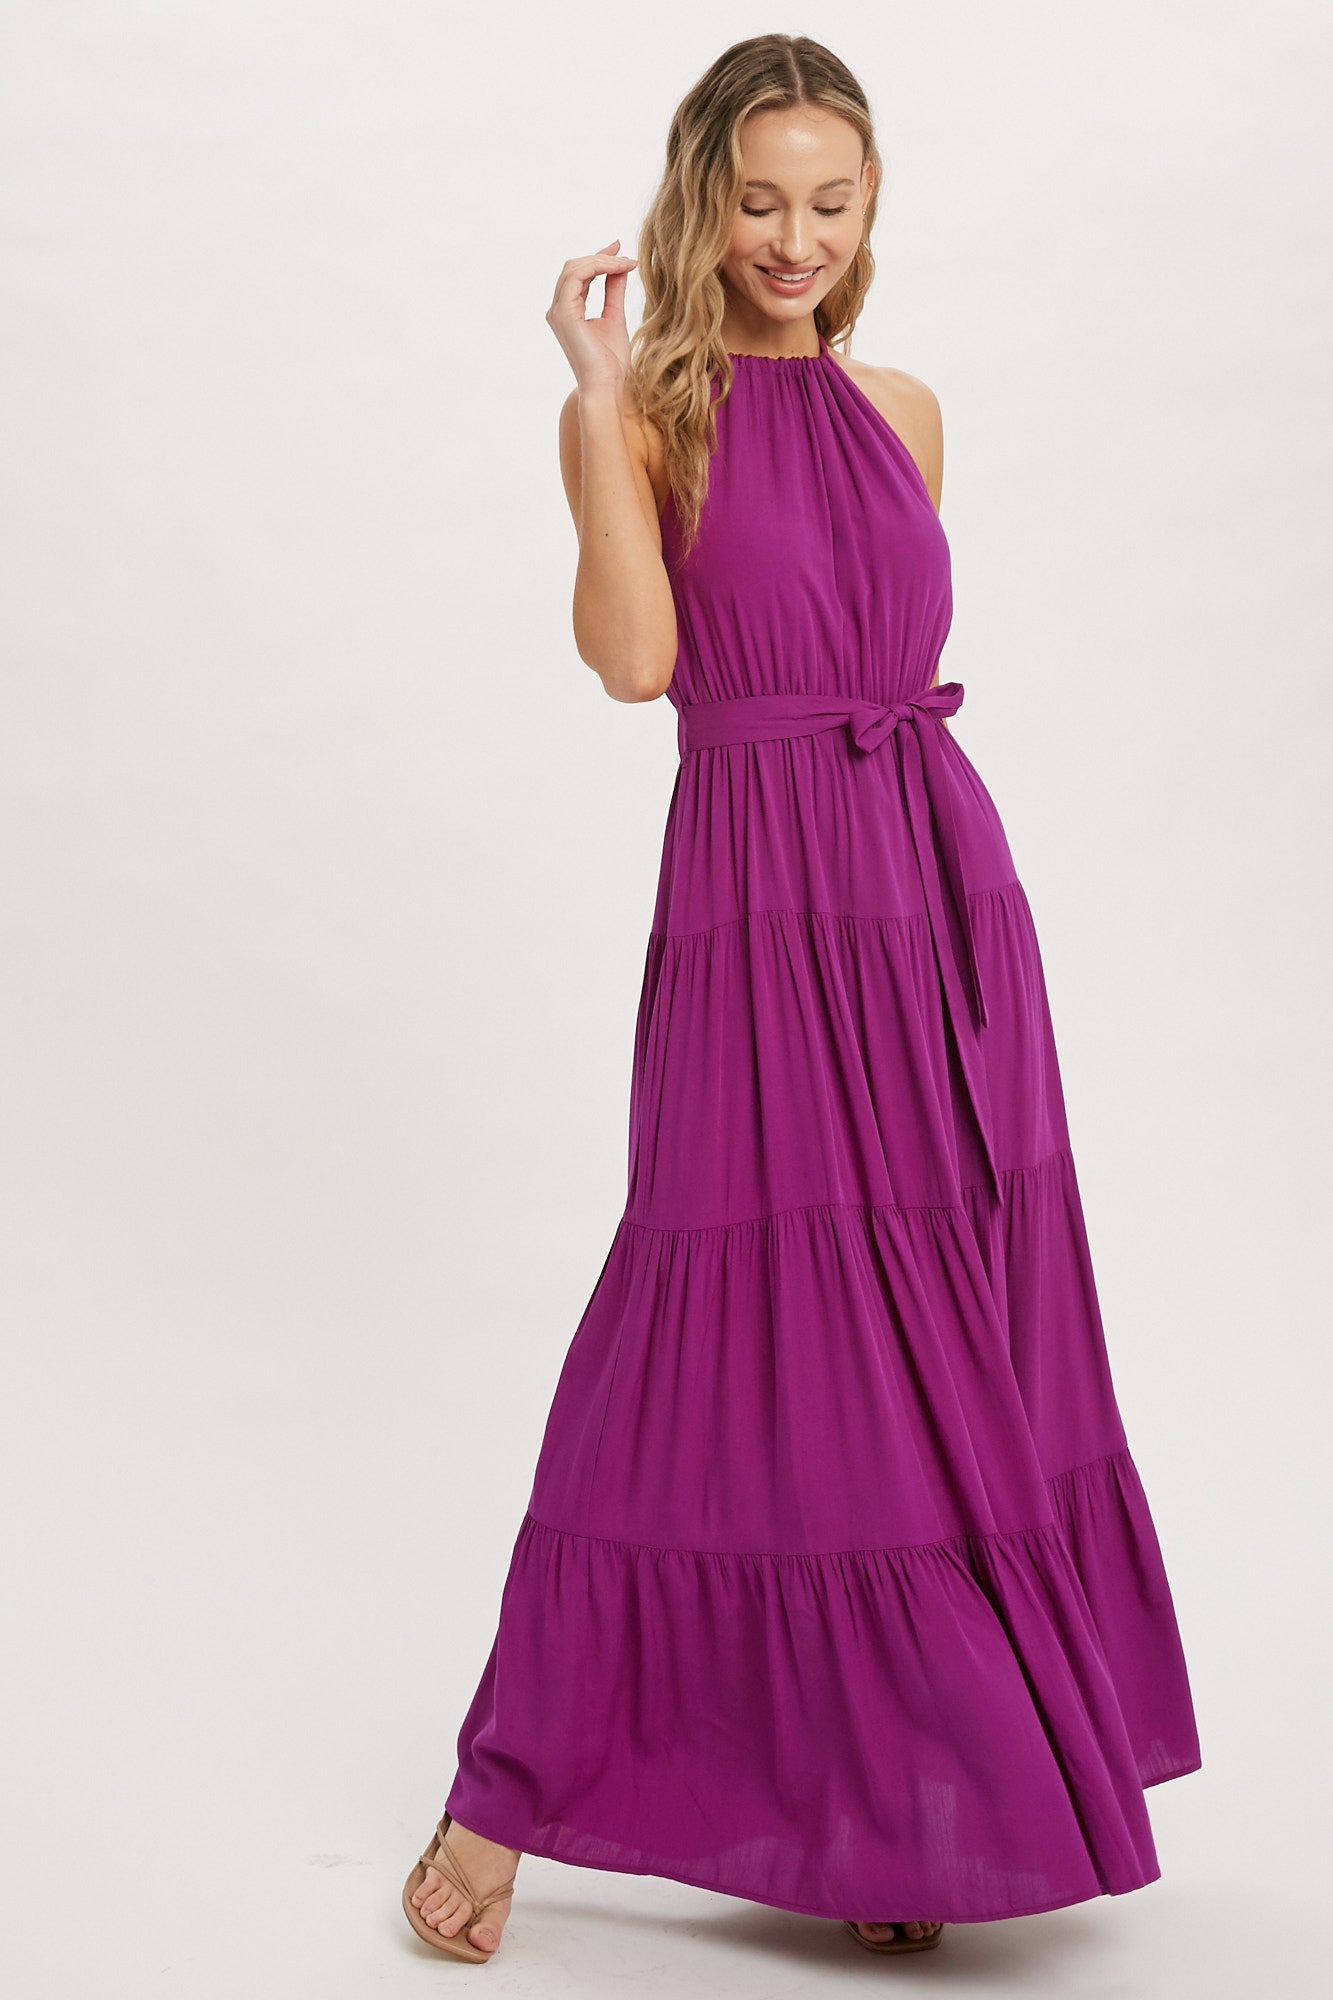 Tiered Maxi Dress in Orchid